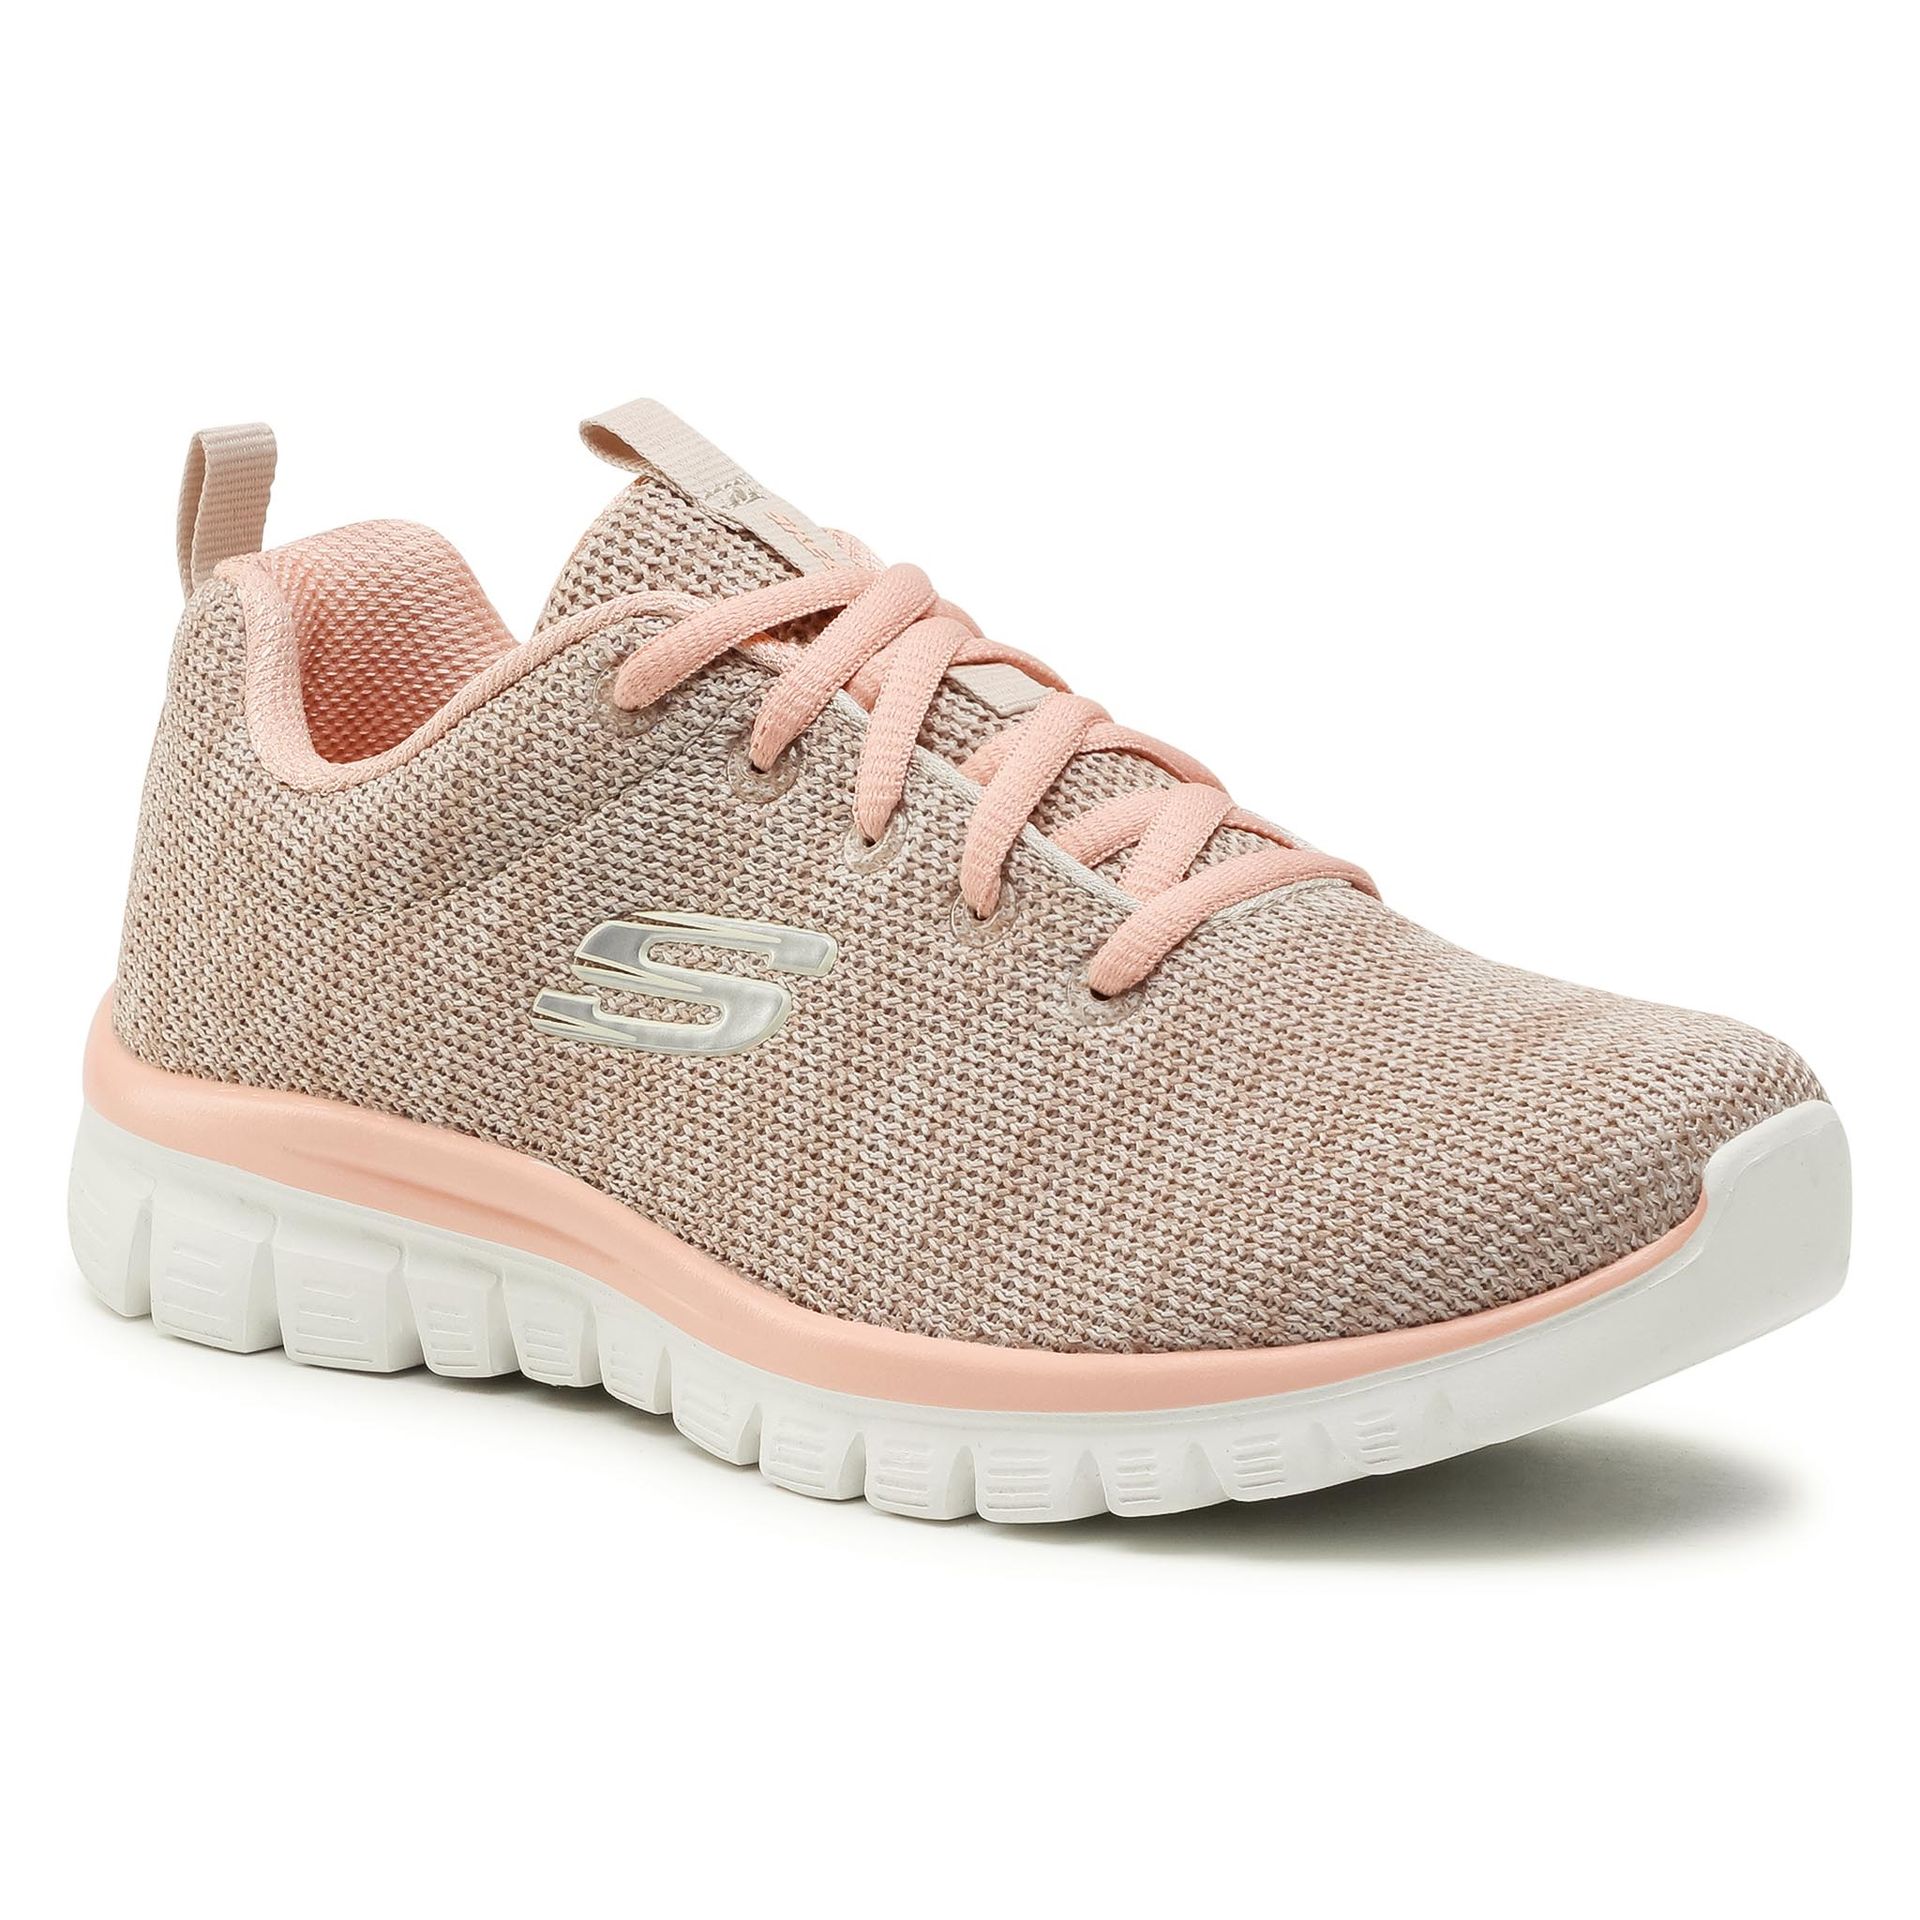 Skechers Graceful - Twisted Fortune 12614-ntcl